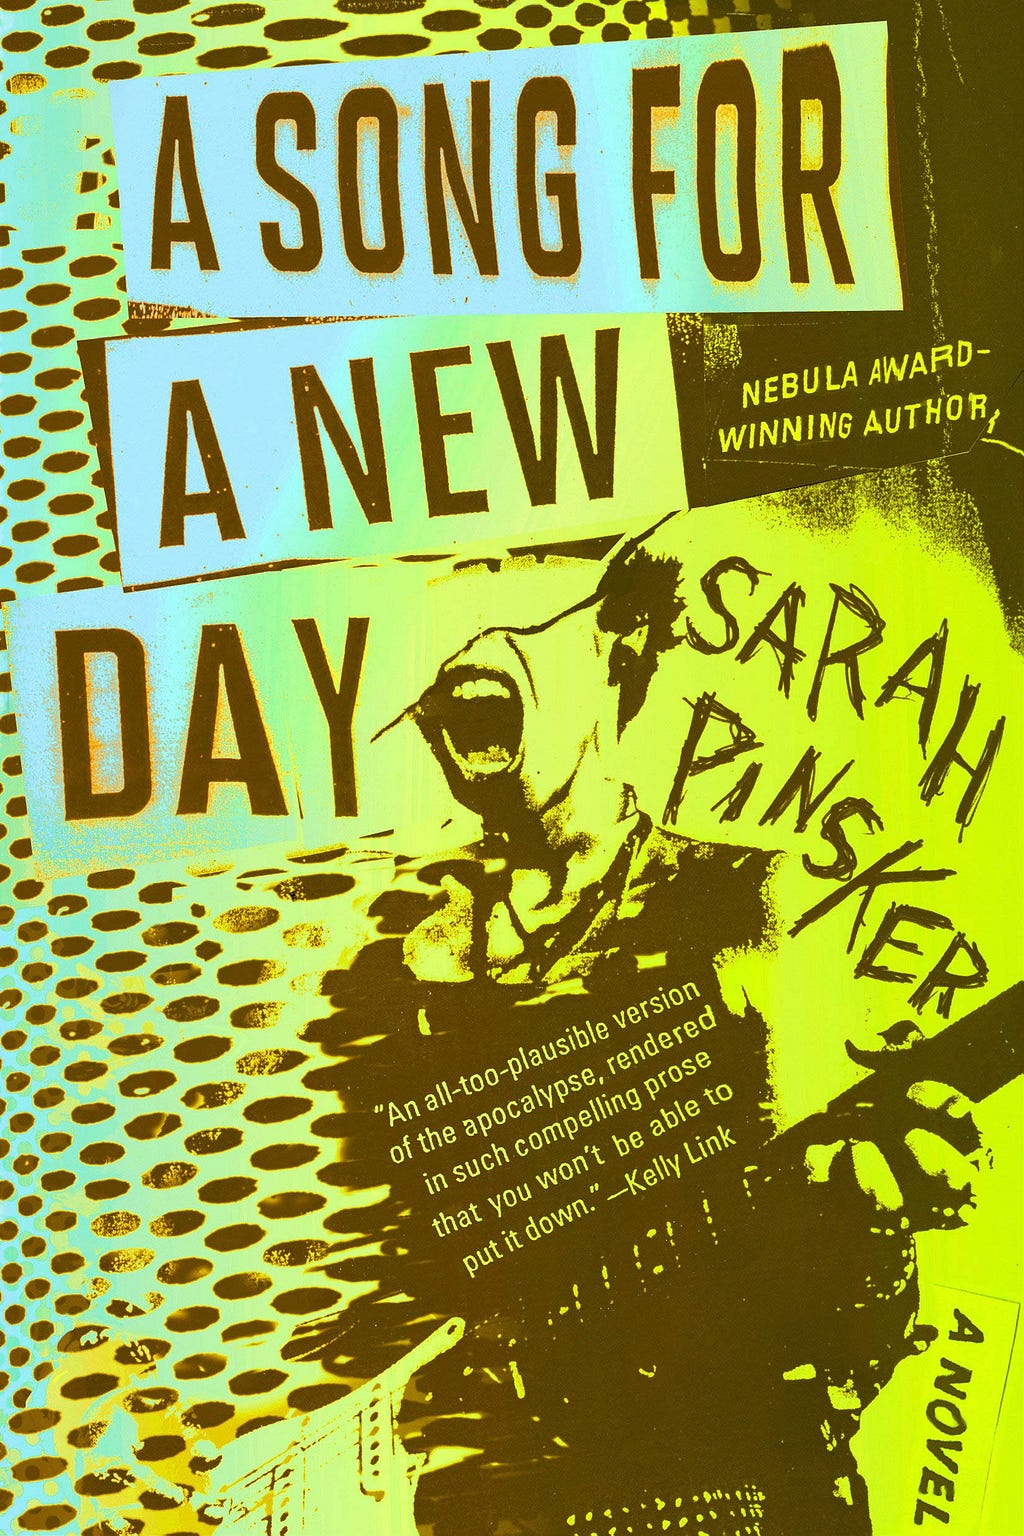 Cover of the book “A Song for a New Day” by Sarah Pinsker